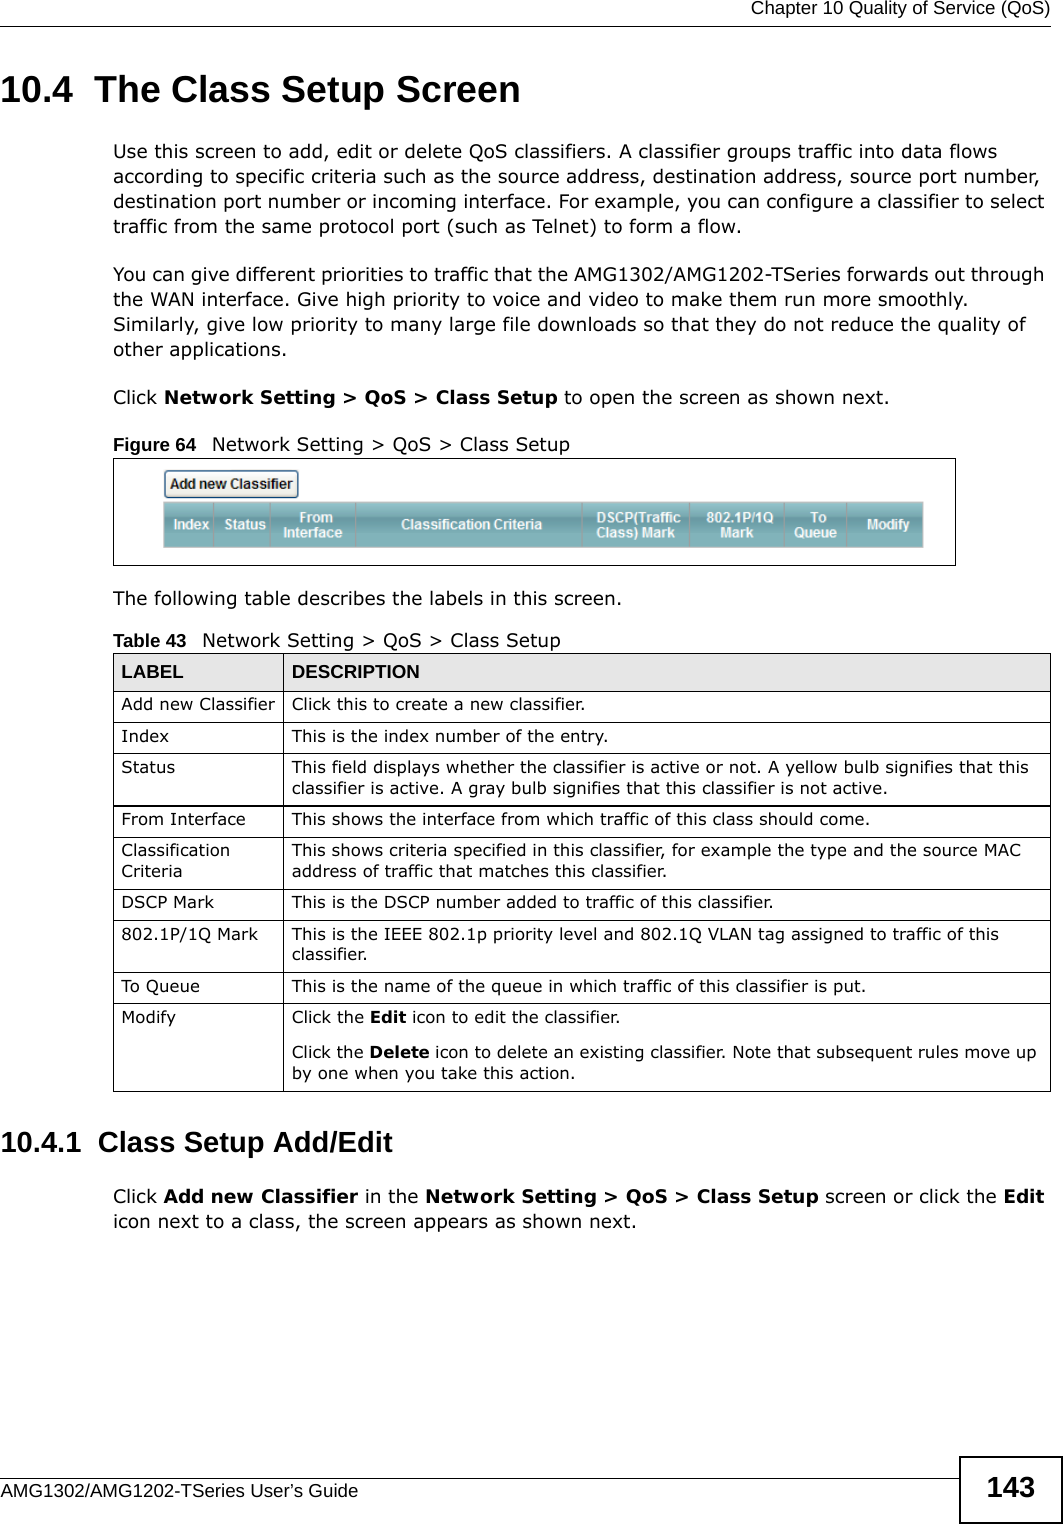  Chapter 10 Quality of Service (QoS)AMG1302/AMG1202-TSeries User’s Guide 14310.4  The Class Setup Screen Use this screen to add, edit or delete QoS classifiers. A classifier groups traffic into data flows according to specific criteria such as the source address, destination address, source port number, destination port number or incoming interface. For example, you can configure a classifier to select traffic from the same protocol port (such as Telnet) to form a flow.You can give different priorities to traffic that the AMG1302/AMG1202-TSeries forwards out through the WAN interface. Give high priority to voice and video to make them run more smoothly. Similarly, give low priority to many large file downloads so that they do not reduce the quality of other applications. Click Network Setting &gt; QoS &gt; Class Setup to open the screen as shown next.Figure 64   Network Setting &gt; QoS &gt; Class SetupThe following table describes the labels in this screen. 10.4.1  Class Setup Add/EditClick Add new Classifier in the Network Setting &gt; QoS &gt; Class Setup screen or click the Edit icon next to a class, the screen appears as shown next.Table 43   Network Setting &gt; QoS &gt; Class SetupLABEL DESCRIPTIONAdd new Classifier Click this to create a new classifier.Index This is the index number of the entry.Status This field displays whether the classifier is active or not. A yellow bulb signifies that this classifier is active. A gray bulb signifies that this classifier is not active.From Interface This shows the interface from which traffic of this class should come.Classification CriteriaThis shows criteria specified in this classifier, for example the type and the source MAC address of traffic that matches this classifier.DSCP Mark This is the DSCP number added to traffic of this classifier.802.1P/1Q Mark This is the IEEE 802.1p priority level and 802.1Q VLAN tag assigned to traffic of this classifier.To Queue This is the name of the queue in which traffic of this classifier is put.Modify Click the Edit icon to edit the classifier.Click the Delete icon to delete an existing classifier. Note that subsequent rules move up by one when you take this action.